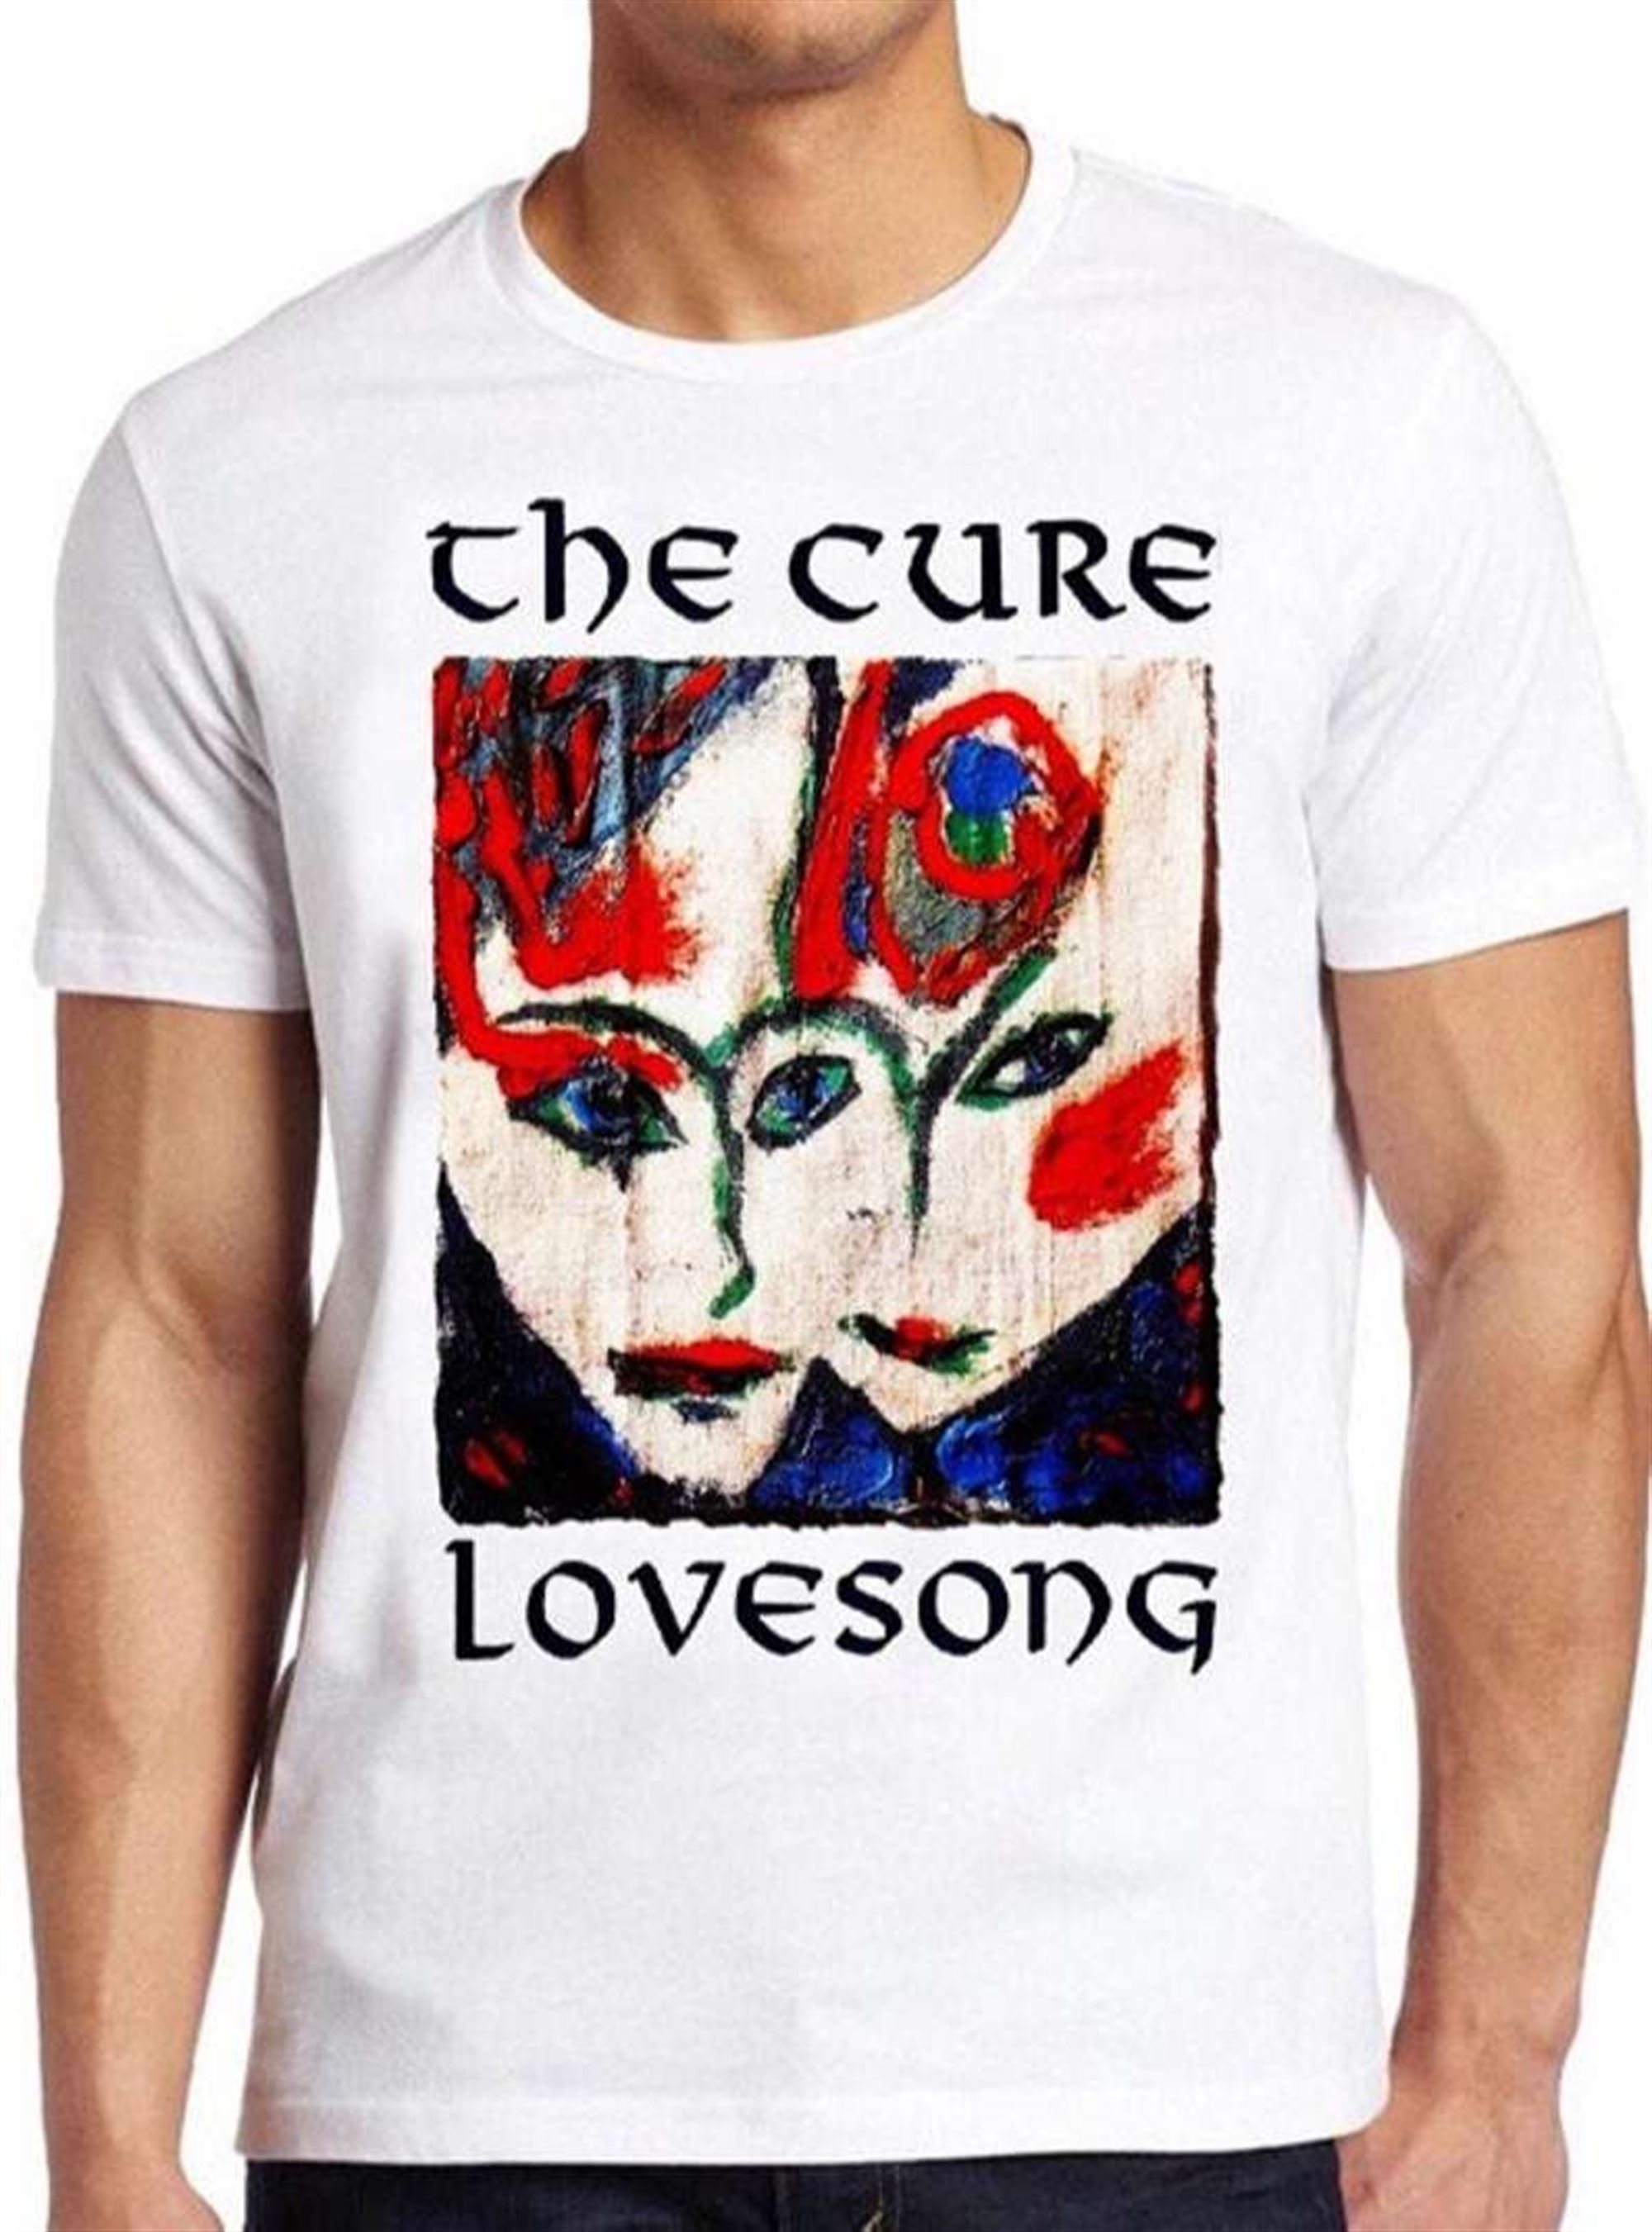 The Cure Lovesong T Shirt Plus Size Up To 5xl